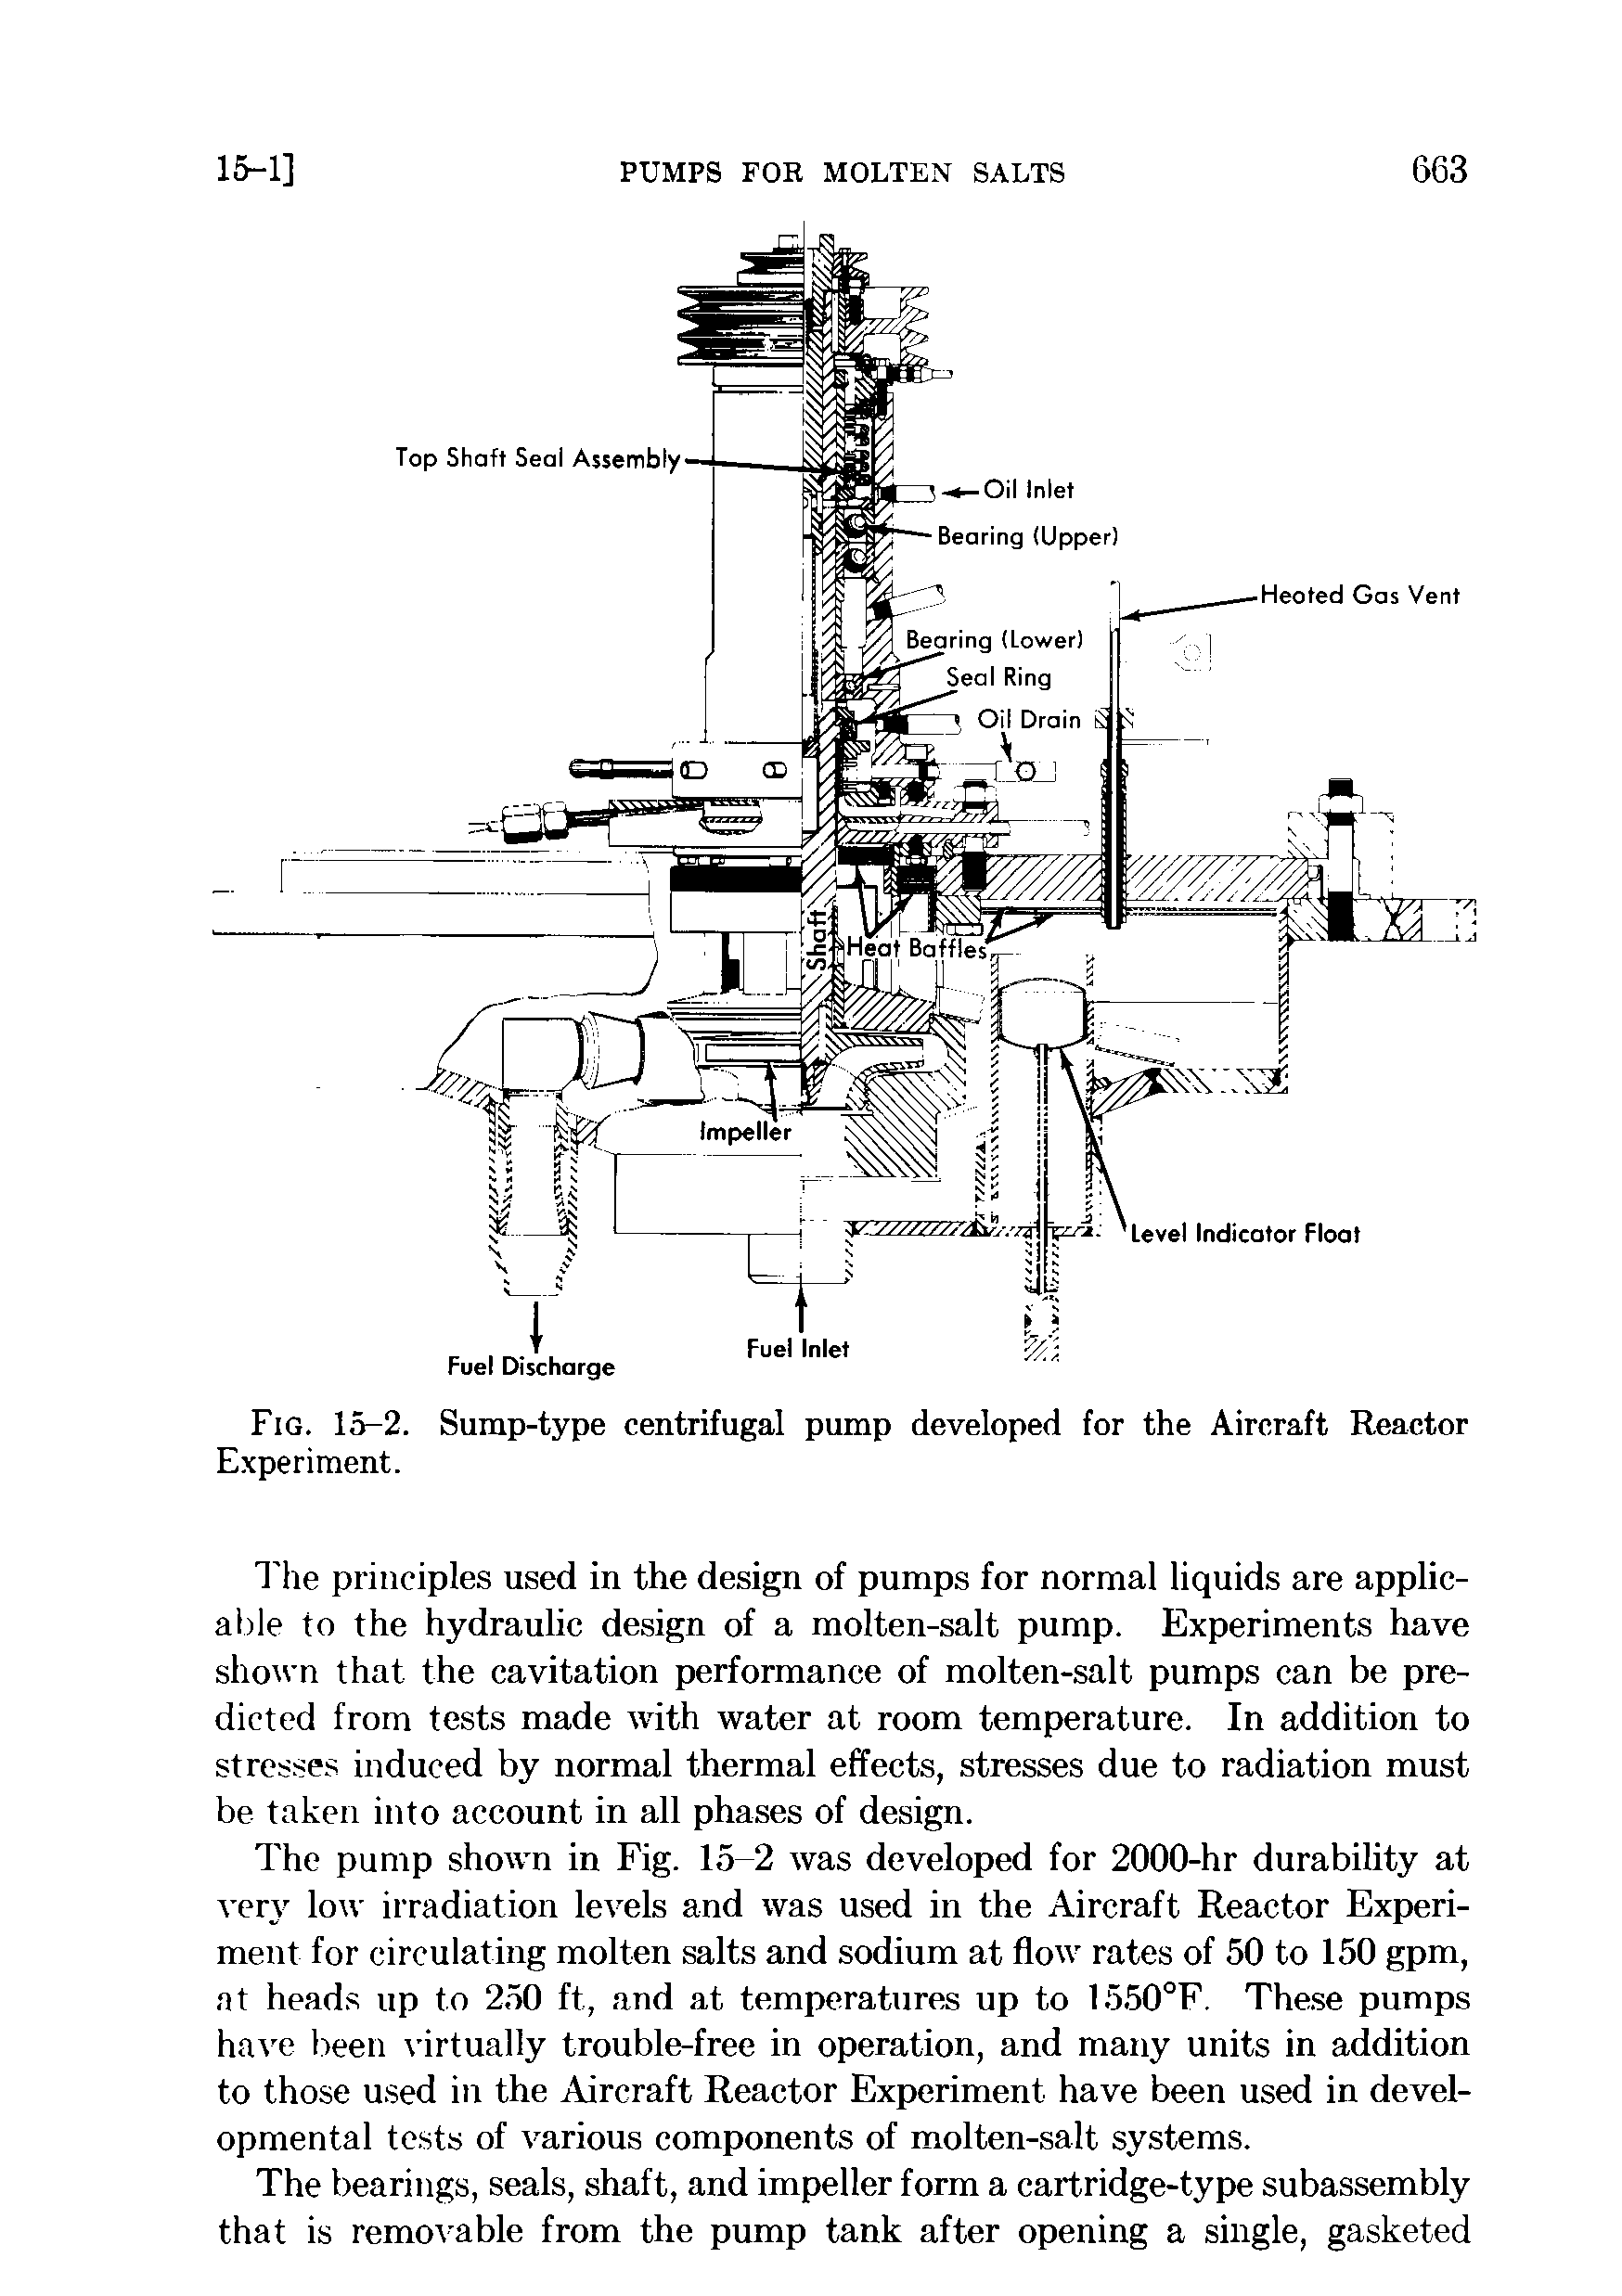 Fig. 15-2. Sump-type centrifugal pump developed for the Aircraft Reactor Experiment.